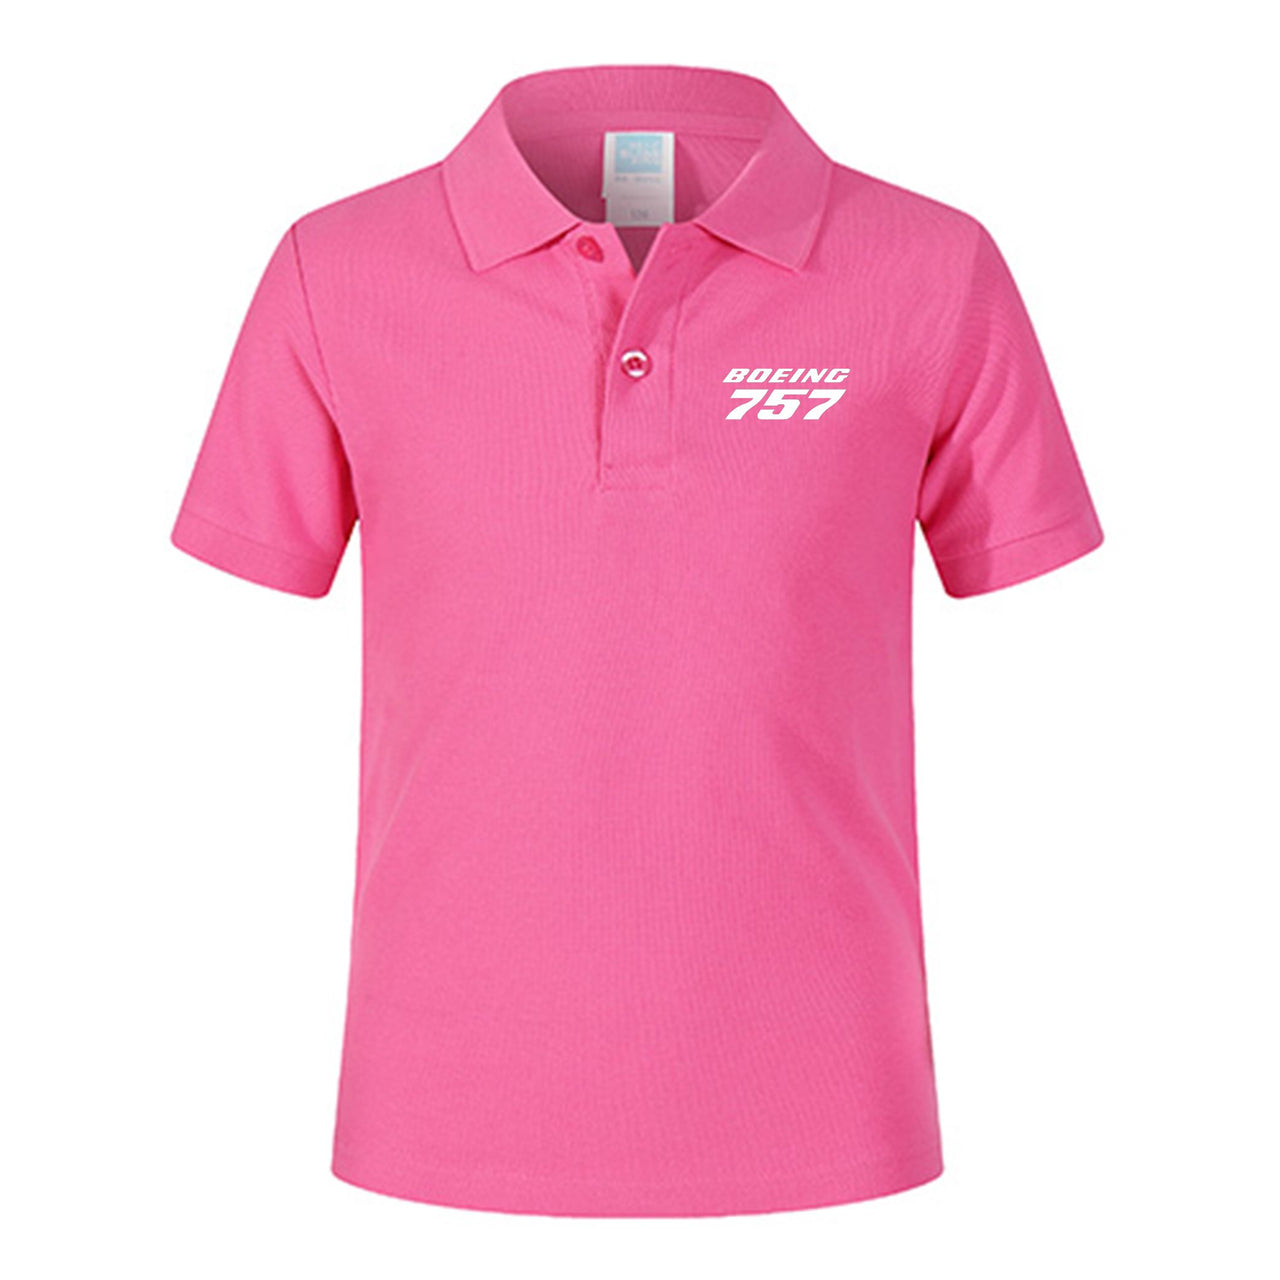 Boeing 757 & Text Designed Children Polo T-Shirts